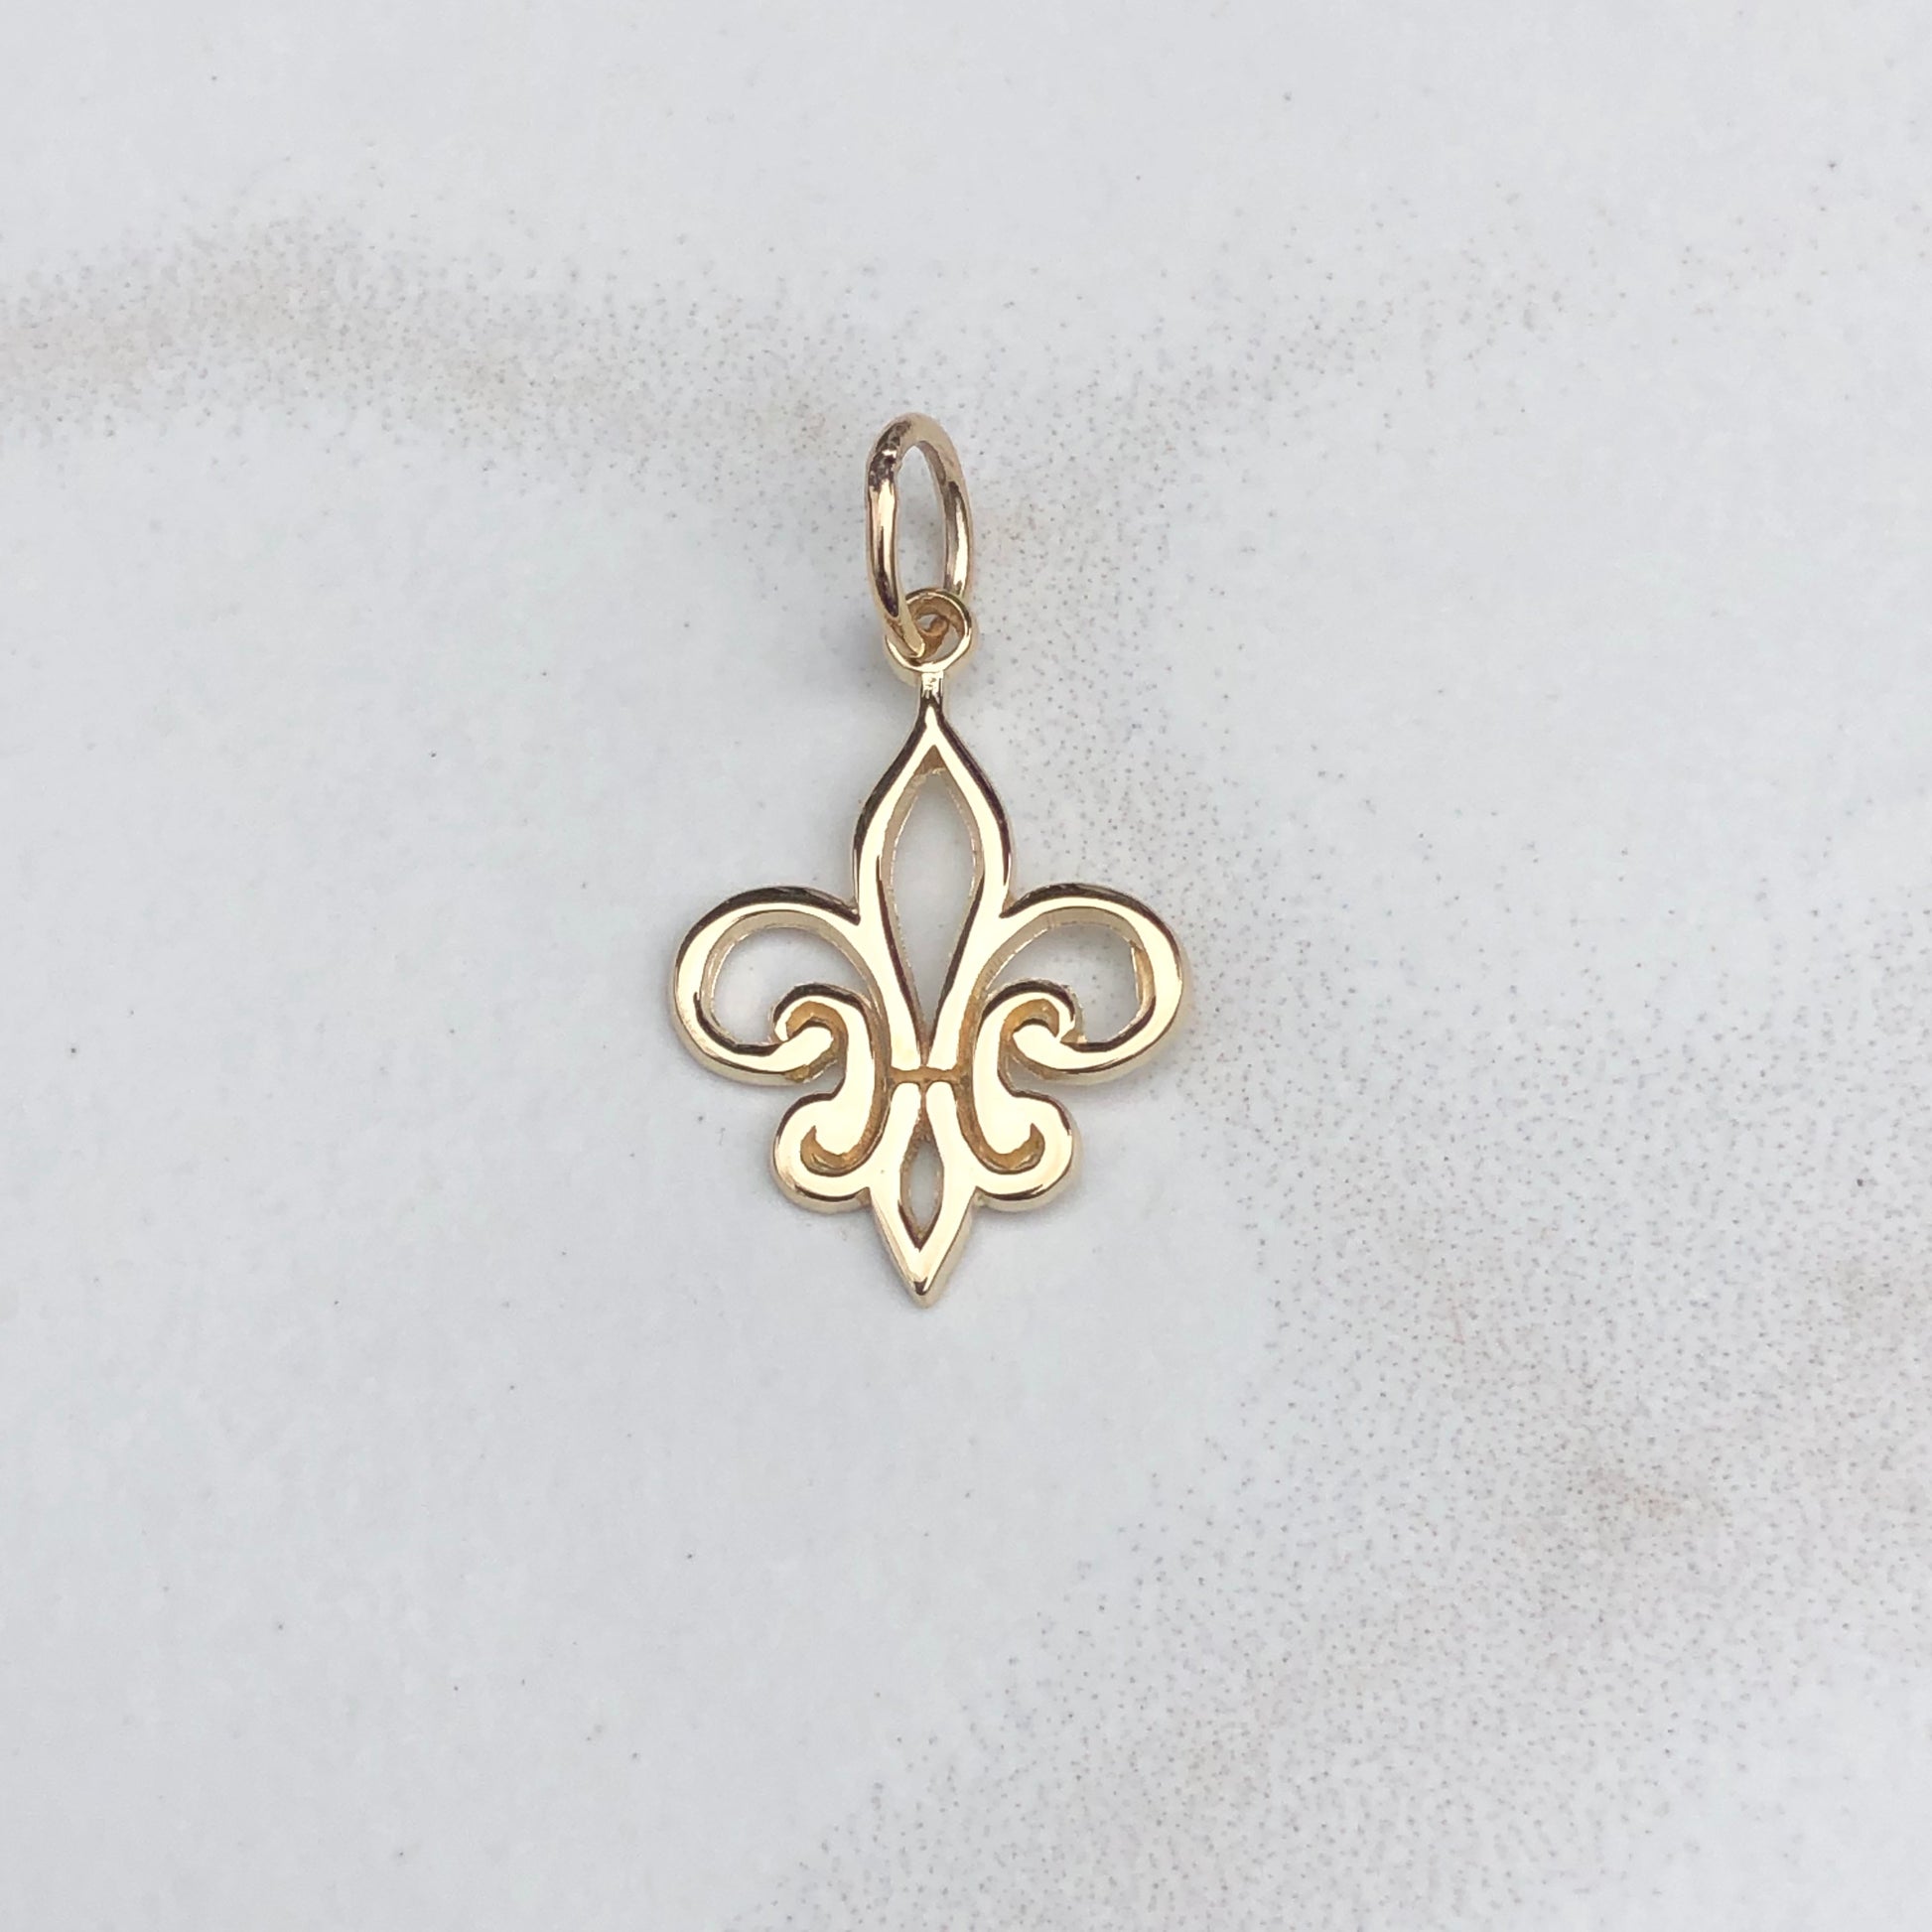 OOO 14KT Yellow Gold Small Cut-Out Fleur de Lis Pendant Charm, OOO 14KT Yellow Gold Small Cut-Out Fleur de Lis Pendant Charm - Legacy Saint Jewelry